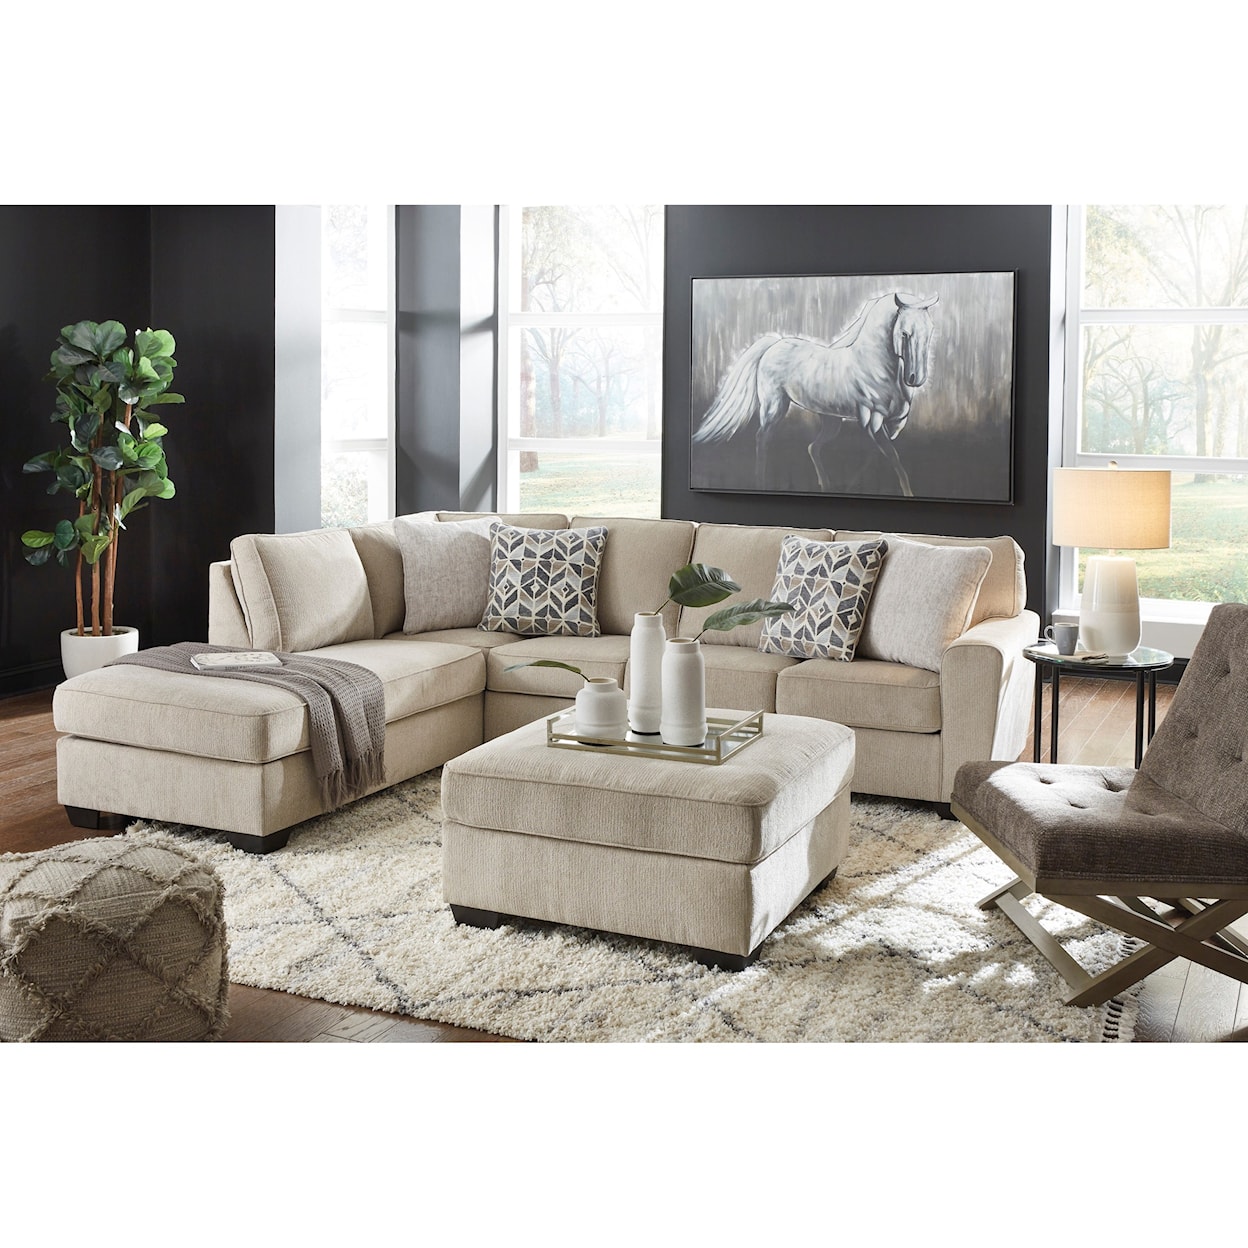 Signature Design by Ashley Furniture Decelle Living Room Group